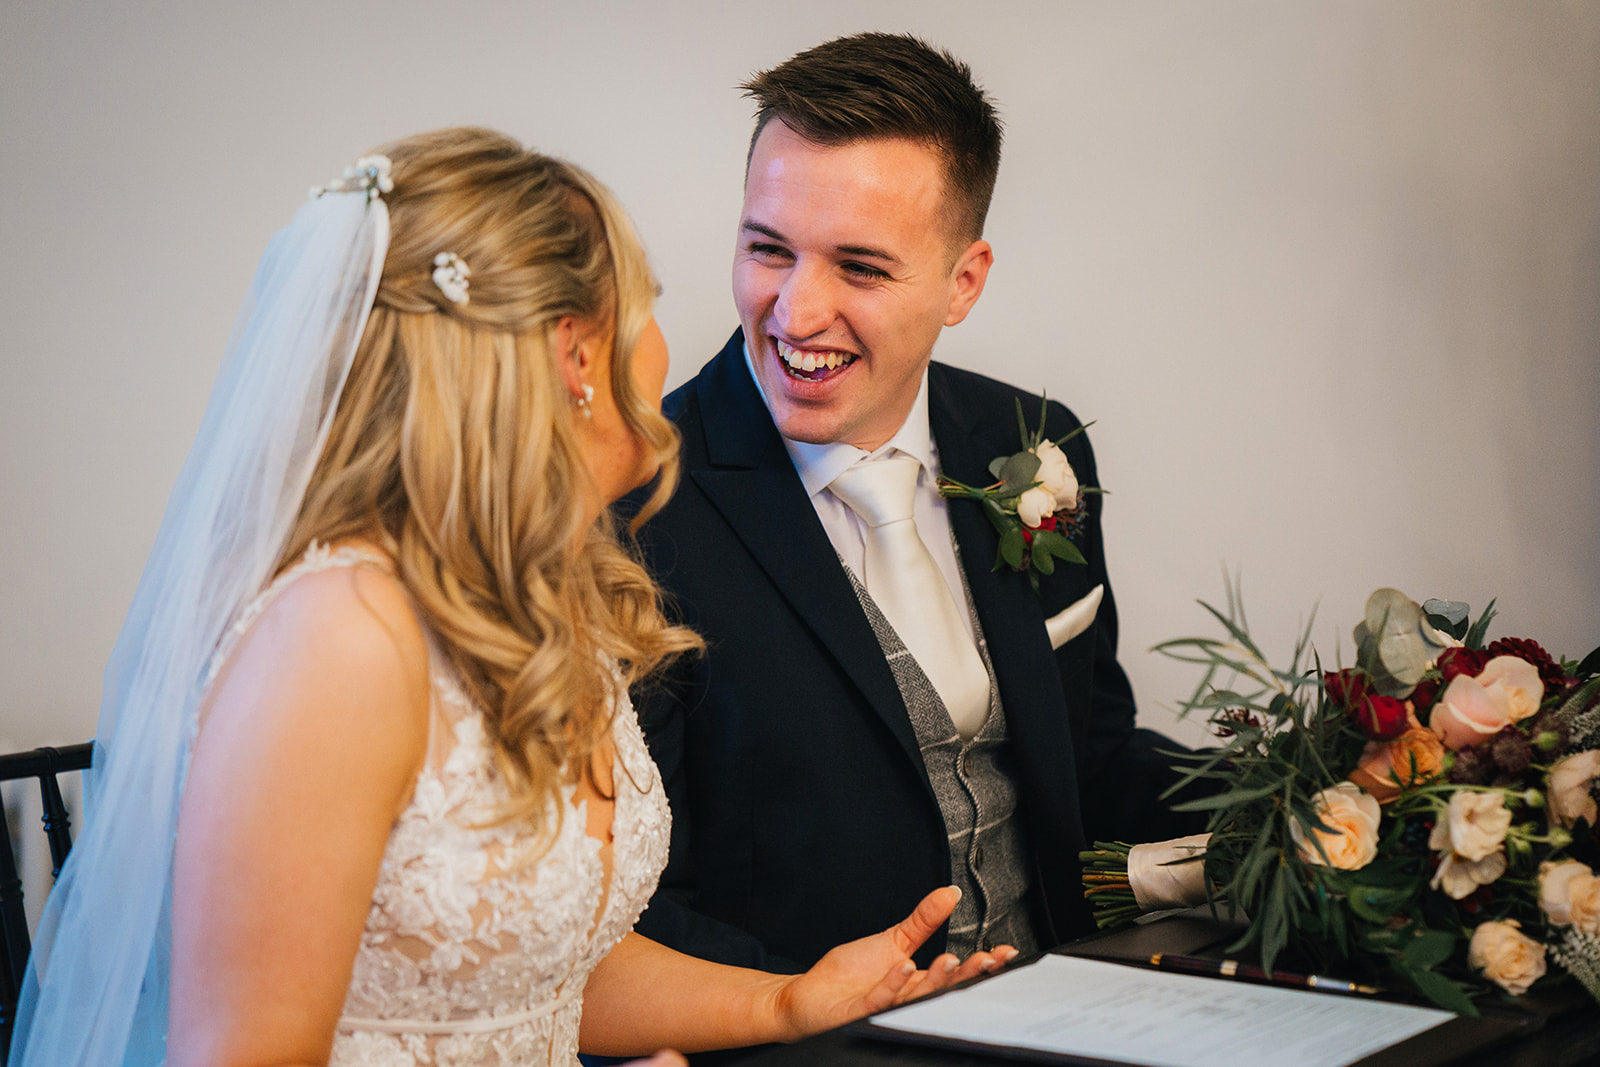 the groom laughs at his new wife as she signs the wedding register